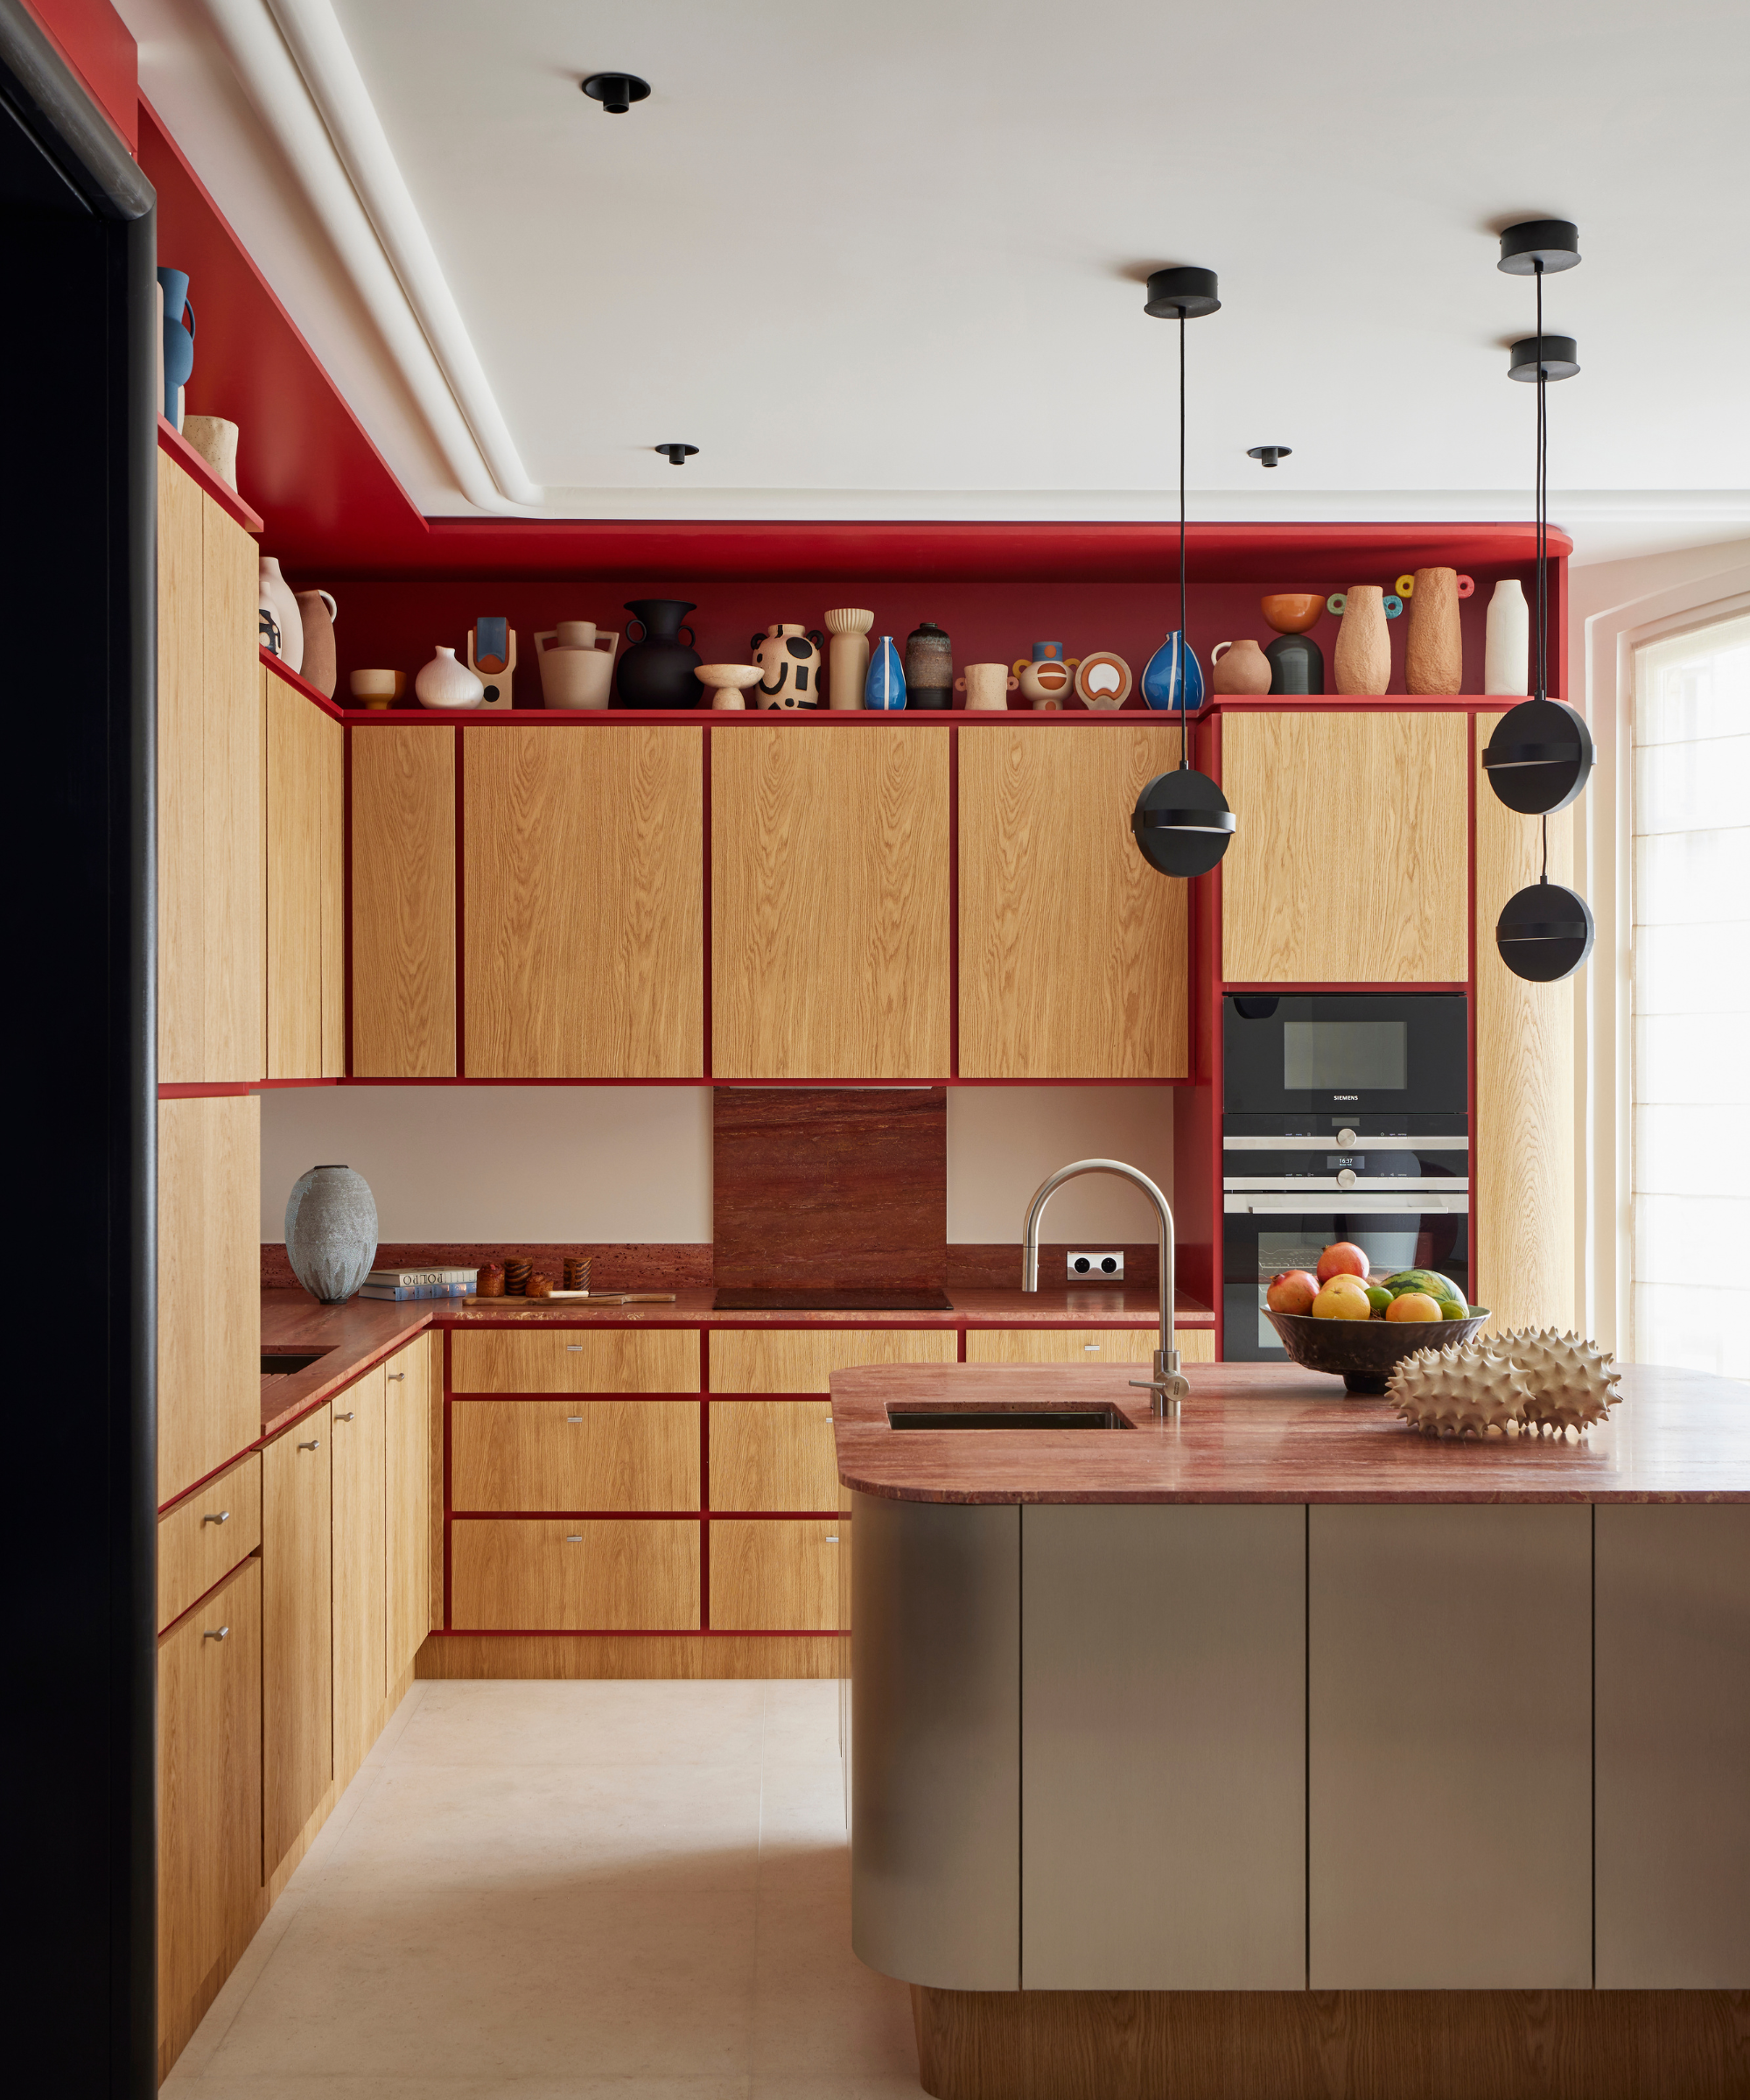 Red and wood tone kitchen with island and round drop pendant lighting